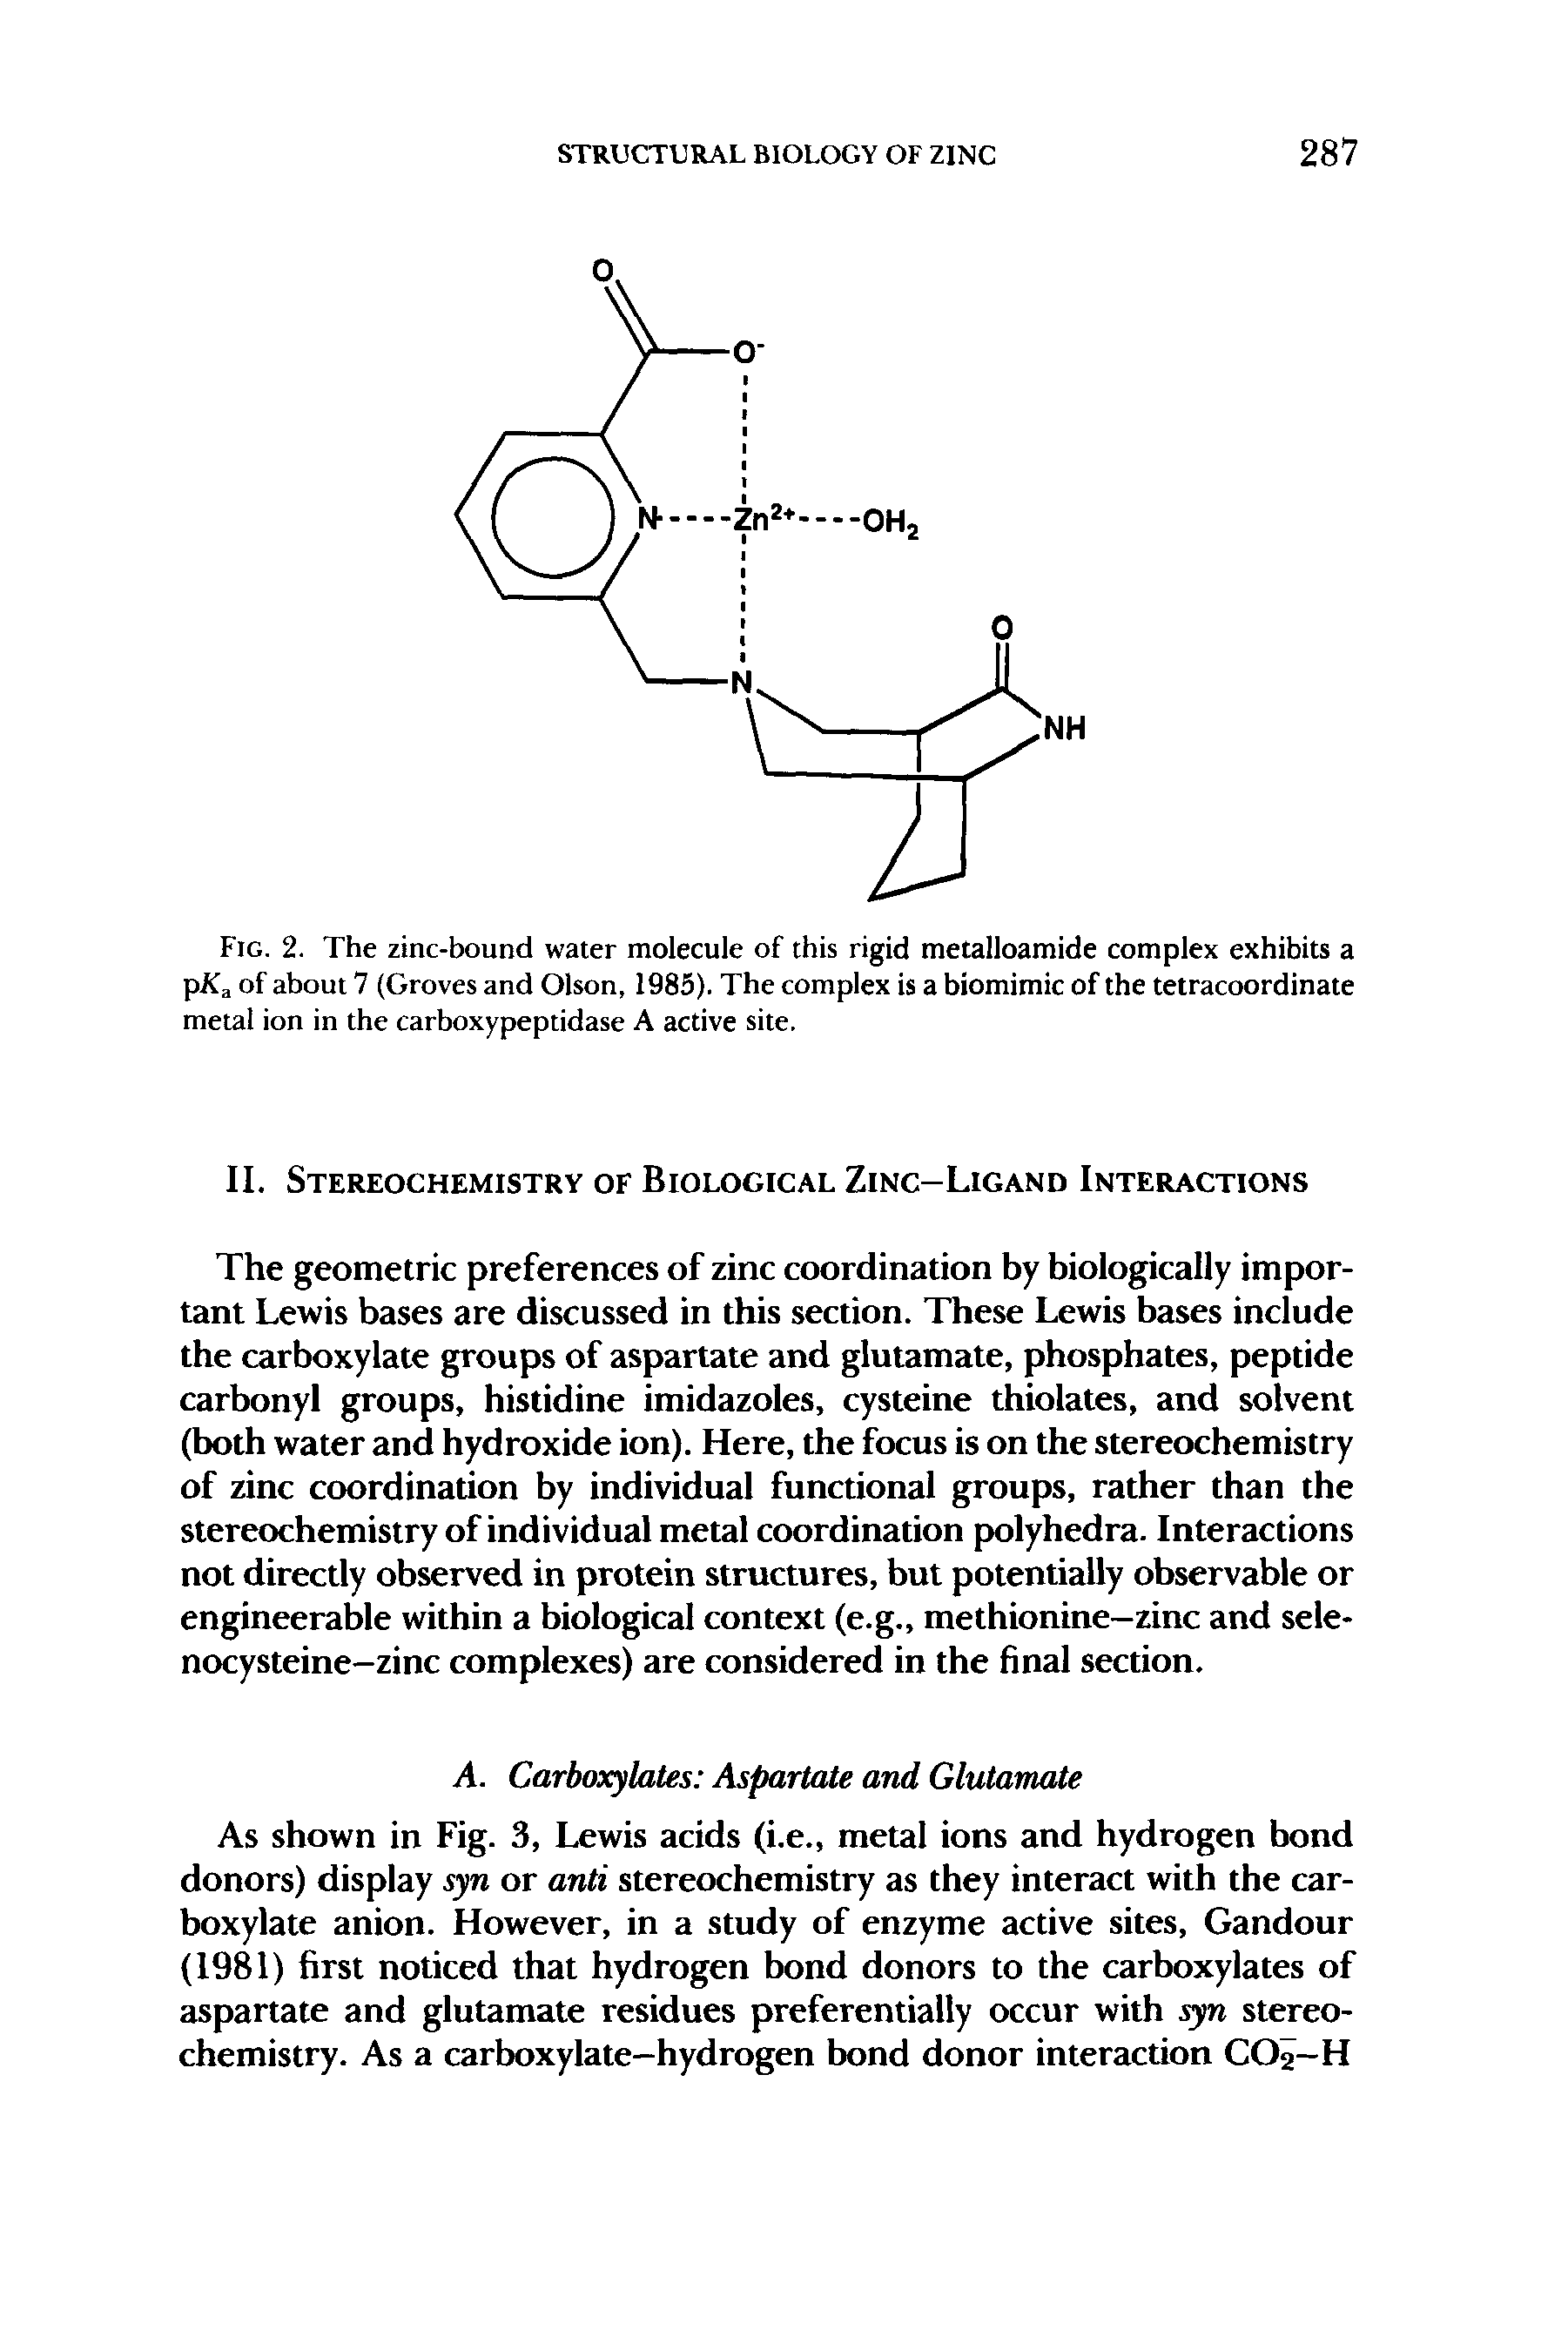 Fig. 2. The zinc-bound water molecule of this rigid metalloamide complex exhibits a pKa of about 7 (Groves and Olson, 1985). The complex is a biomimic of the tetracoordinate metal ion in the carboxypeptidase A active site.